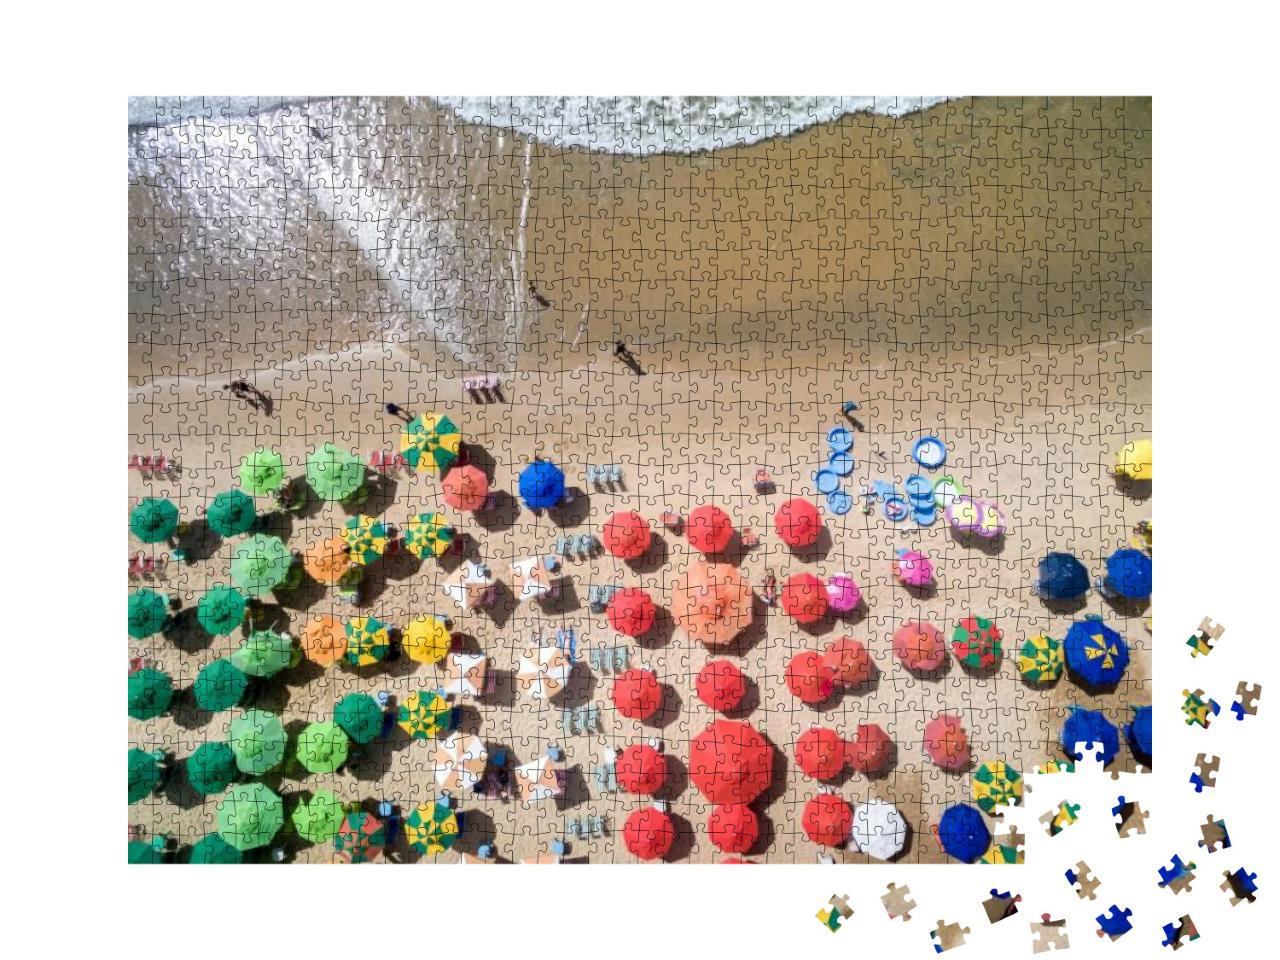 Top View of Umbrellas in a Beach... Jigsaw Puzzle with 1000 pieces